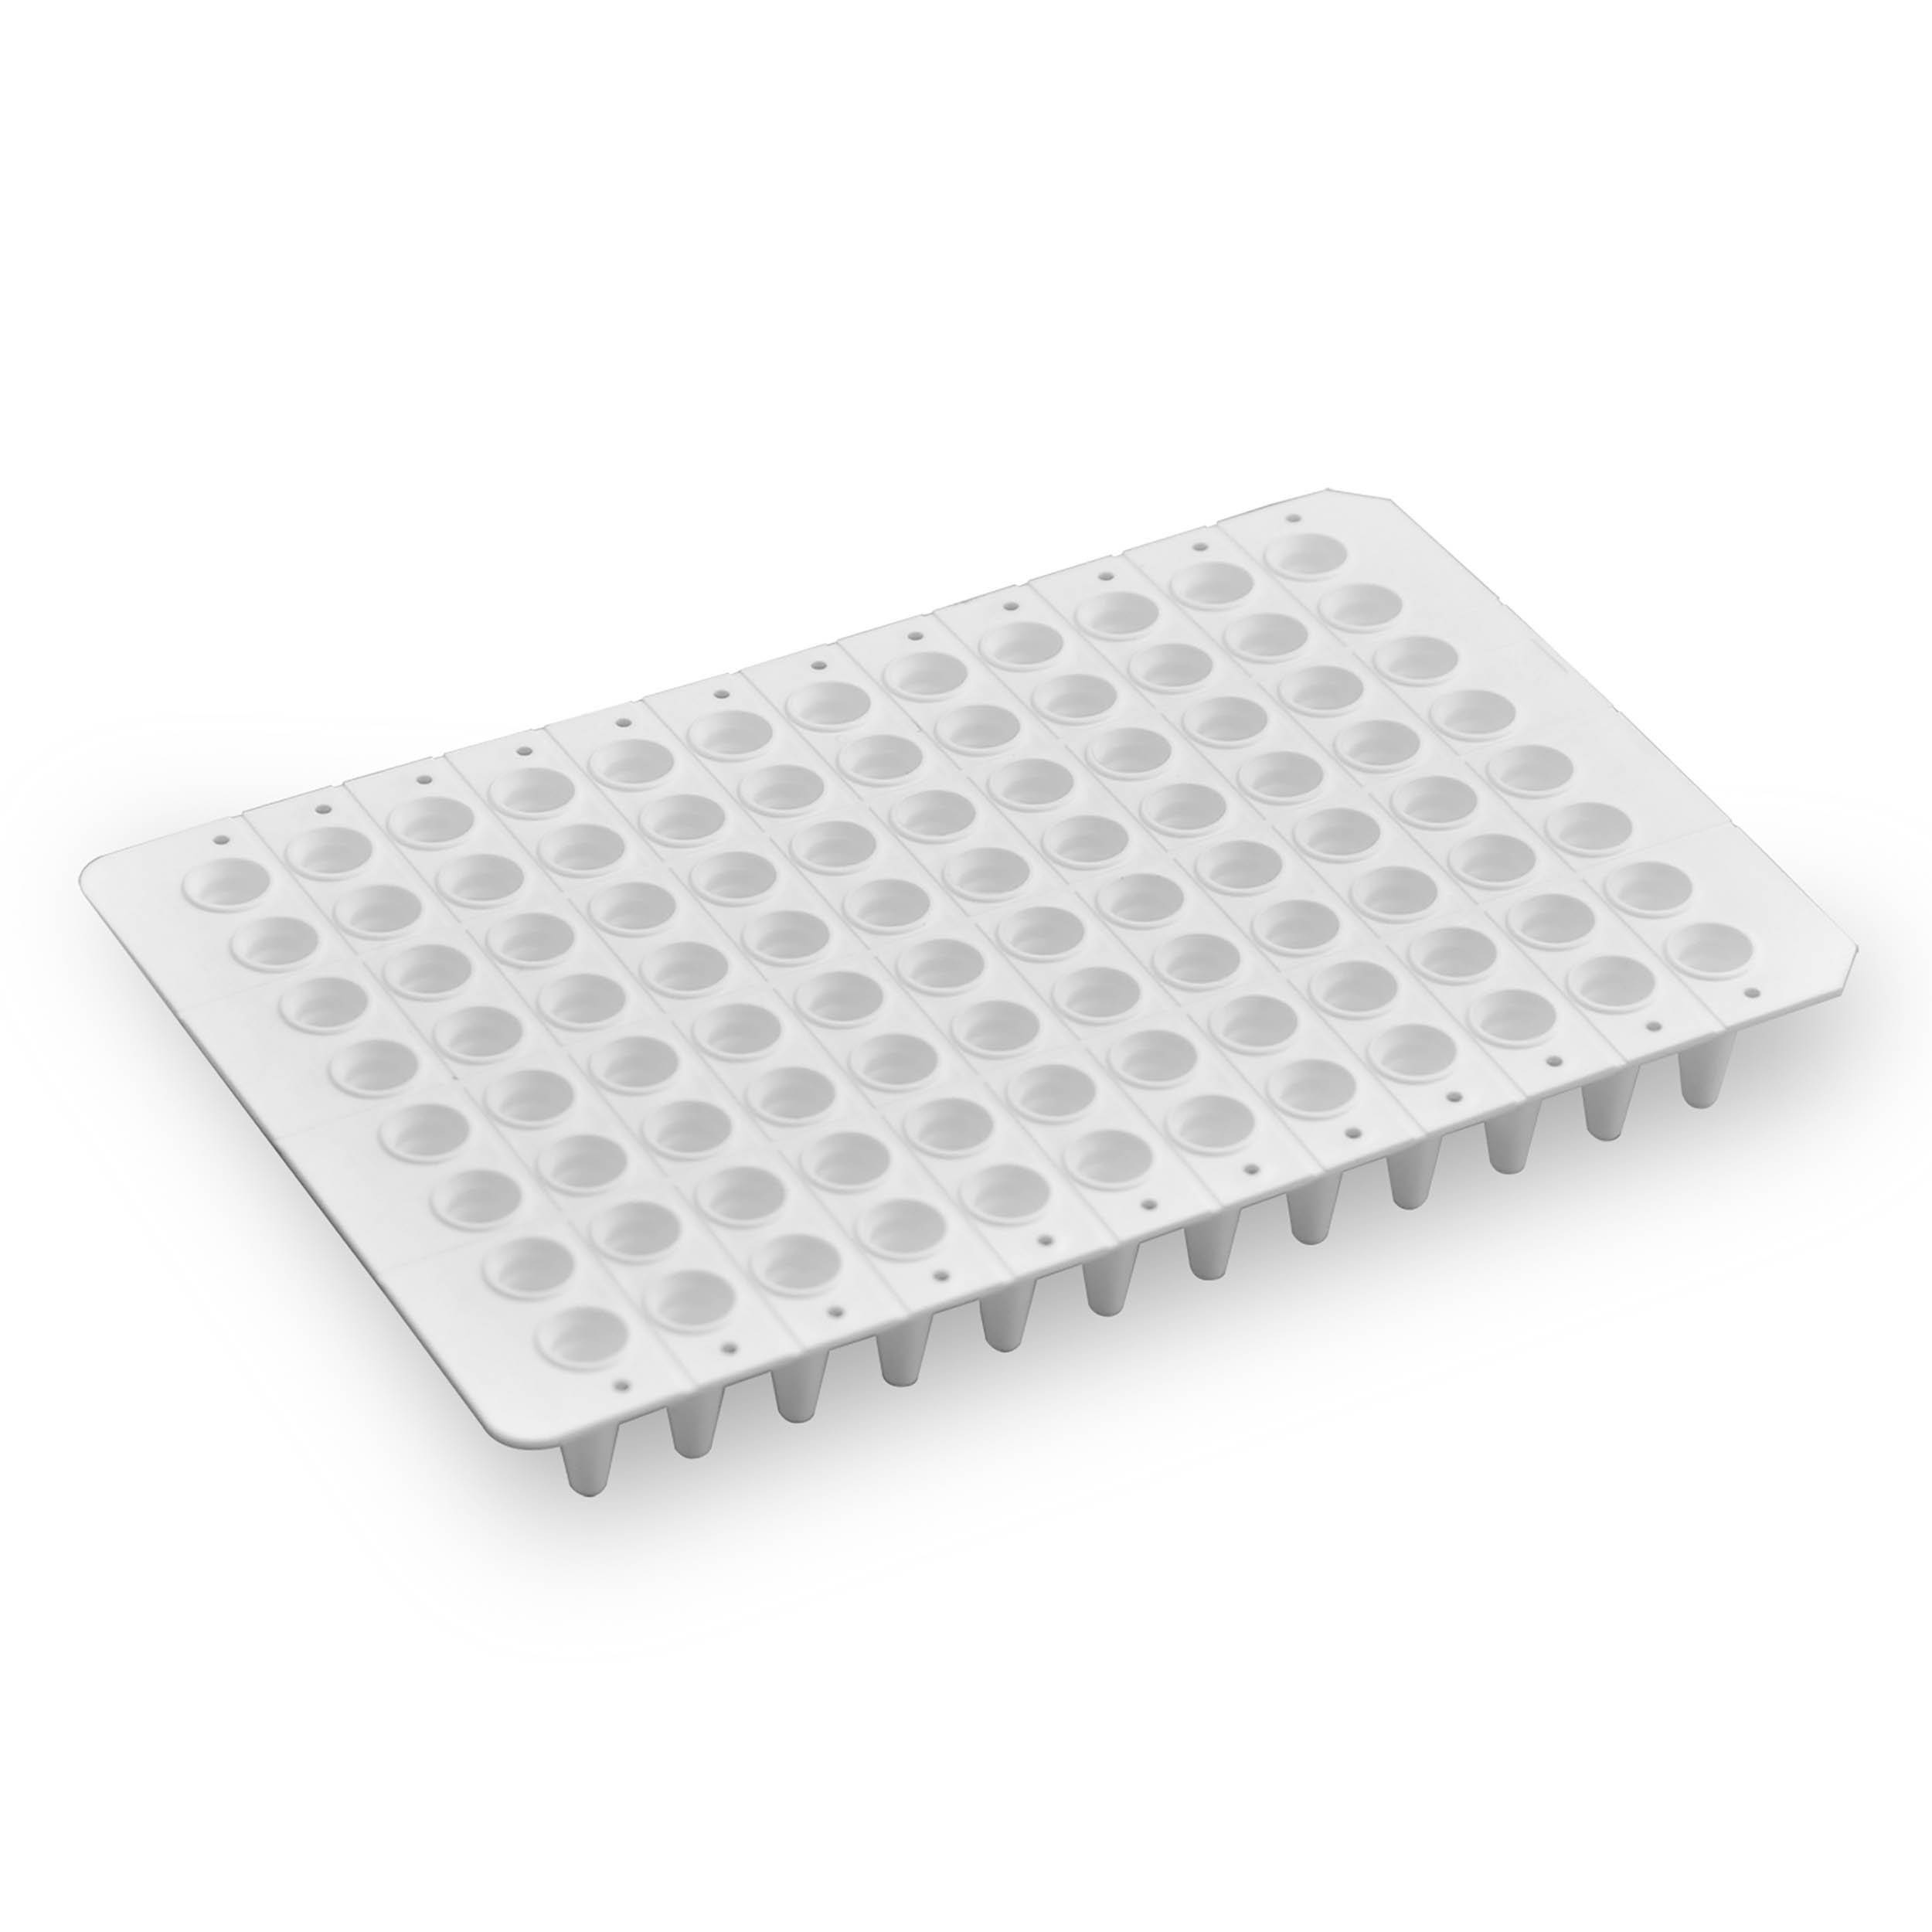 PureAmp Low Profile/Fast 96-Well x 0.1mL PCR Plates - Non-Skirted, White (10 Packs of 50 per Pack)